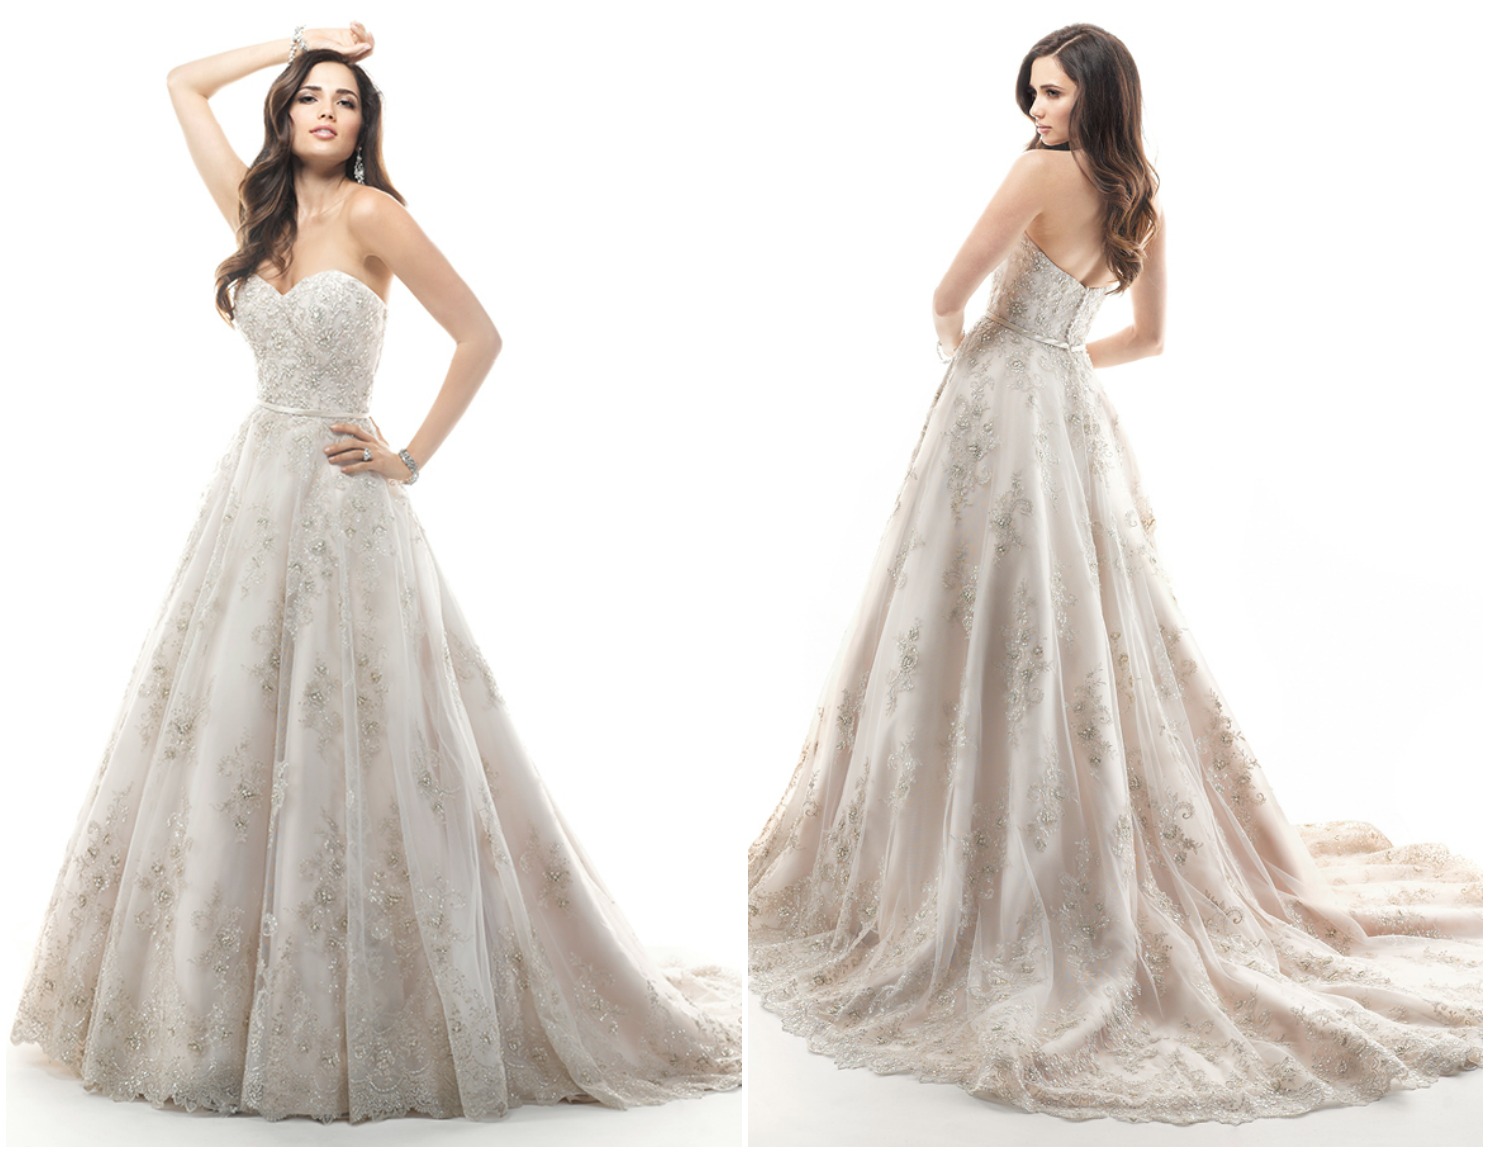 <a href="http://www.maggiesottero.com/dress.aspx?style=4MS901" target="_blank">Maggie Sottero</a>